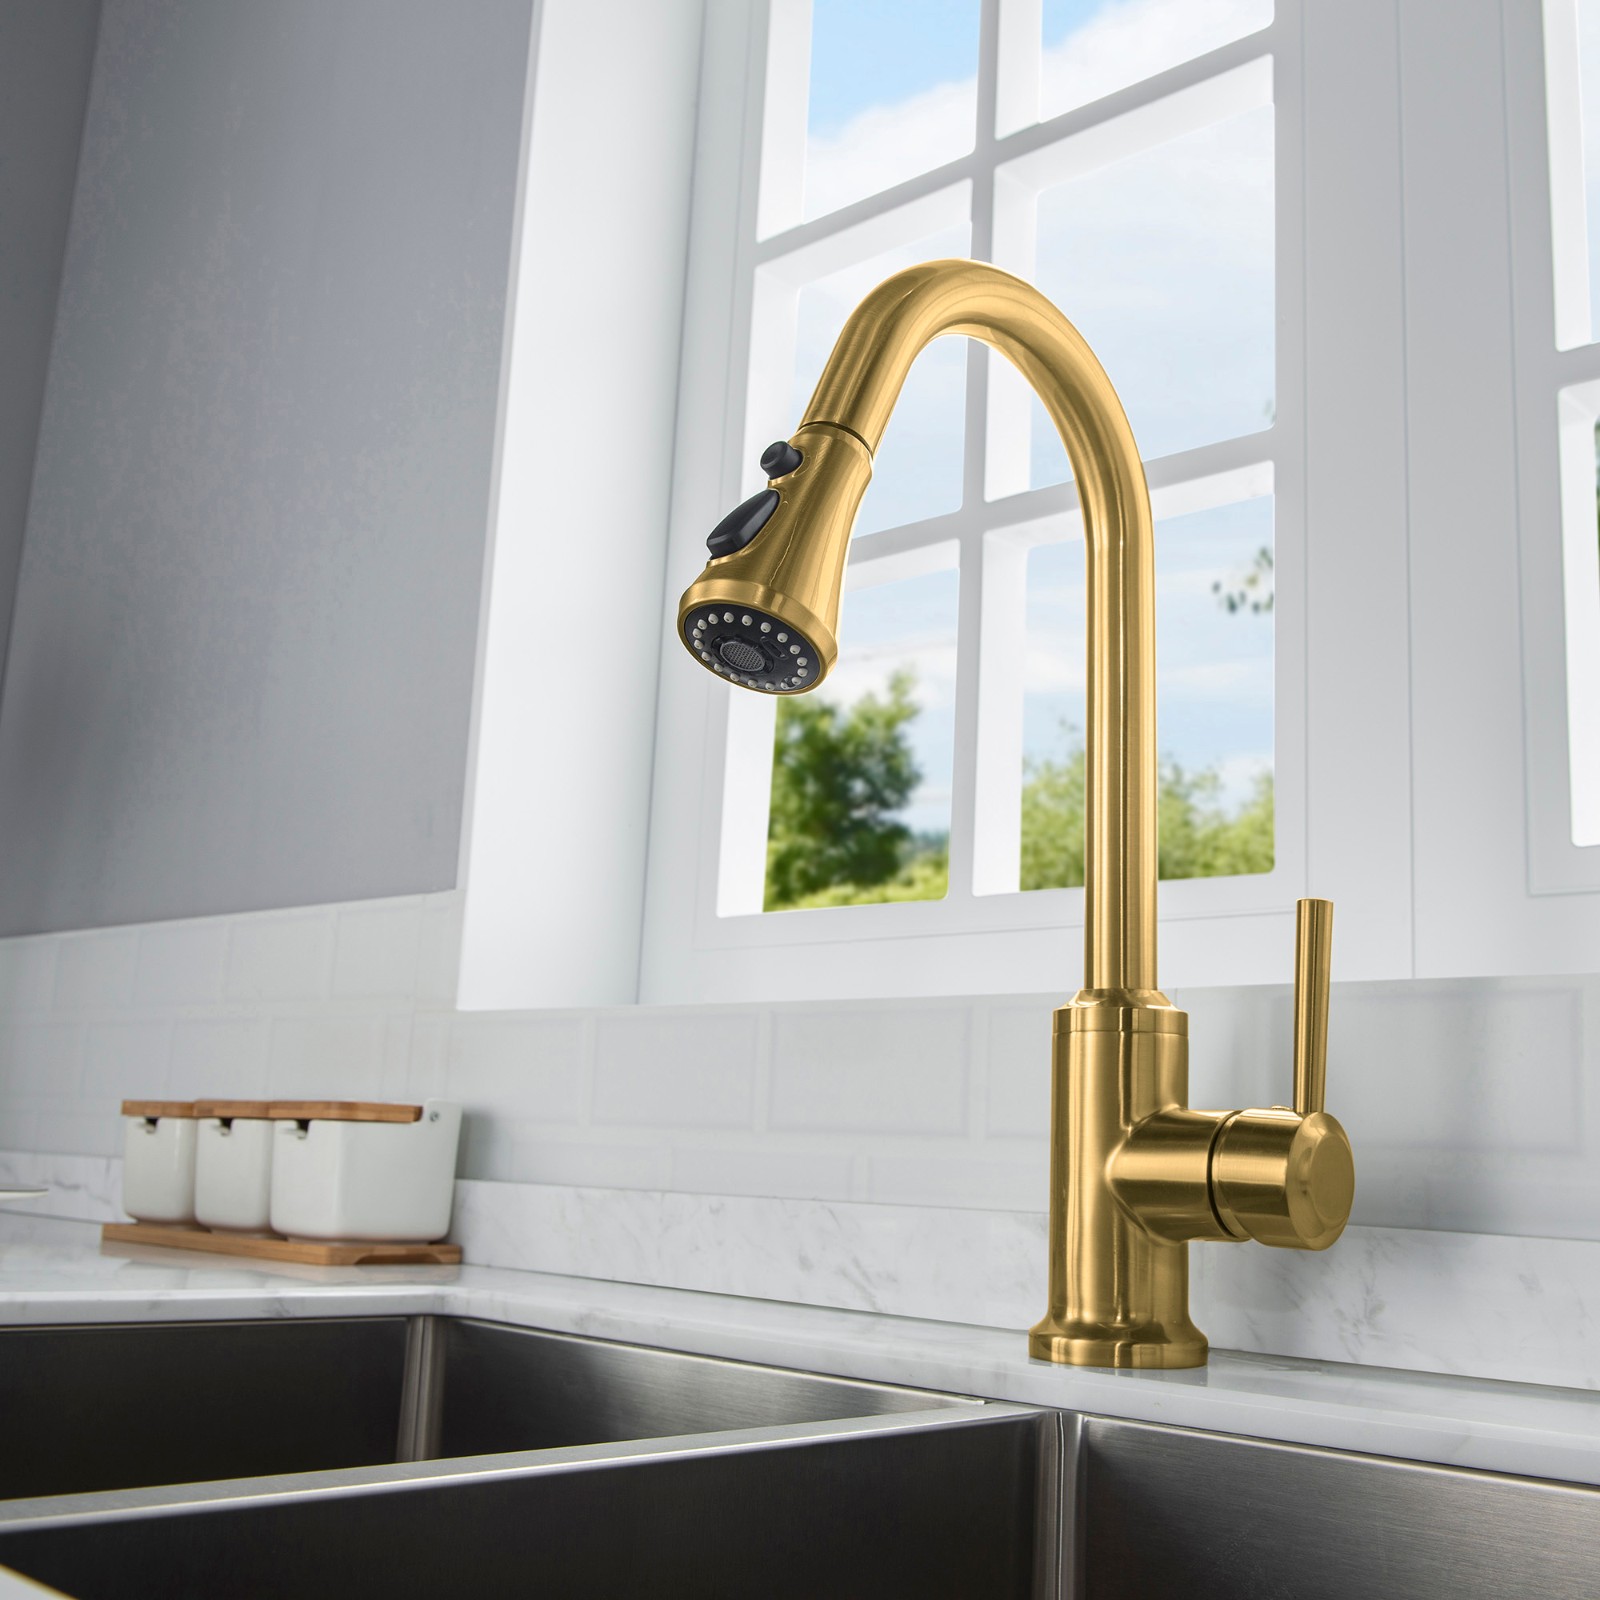  WOODBRIDGE WK101201BG Stainless Steel Single Handle Pull Down Kitchen Faucet in Brushed Gold Finish._4992